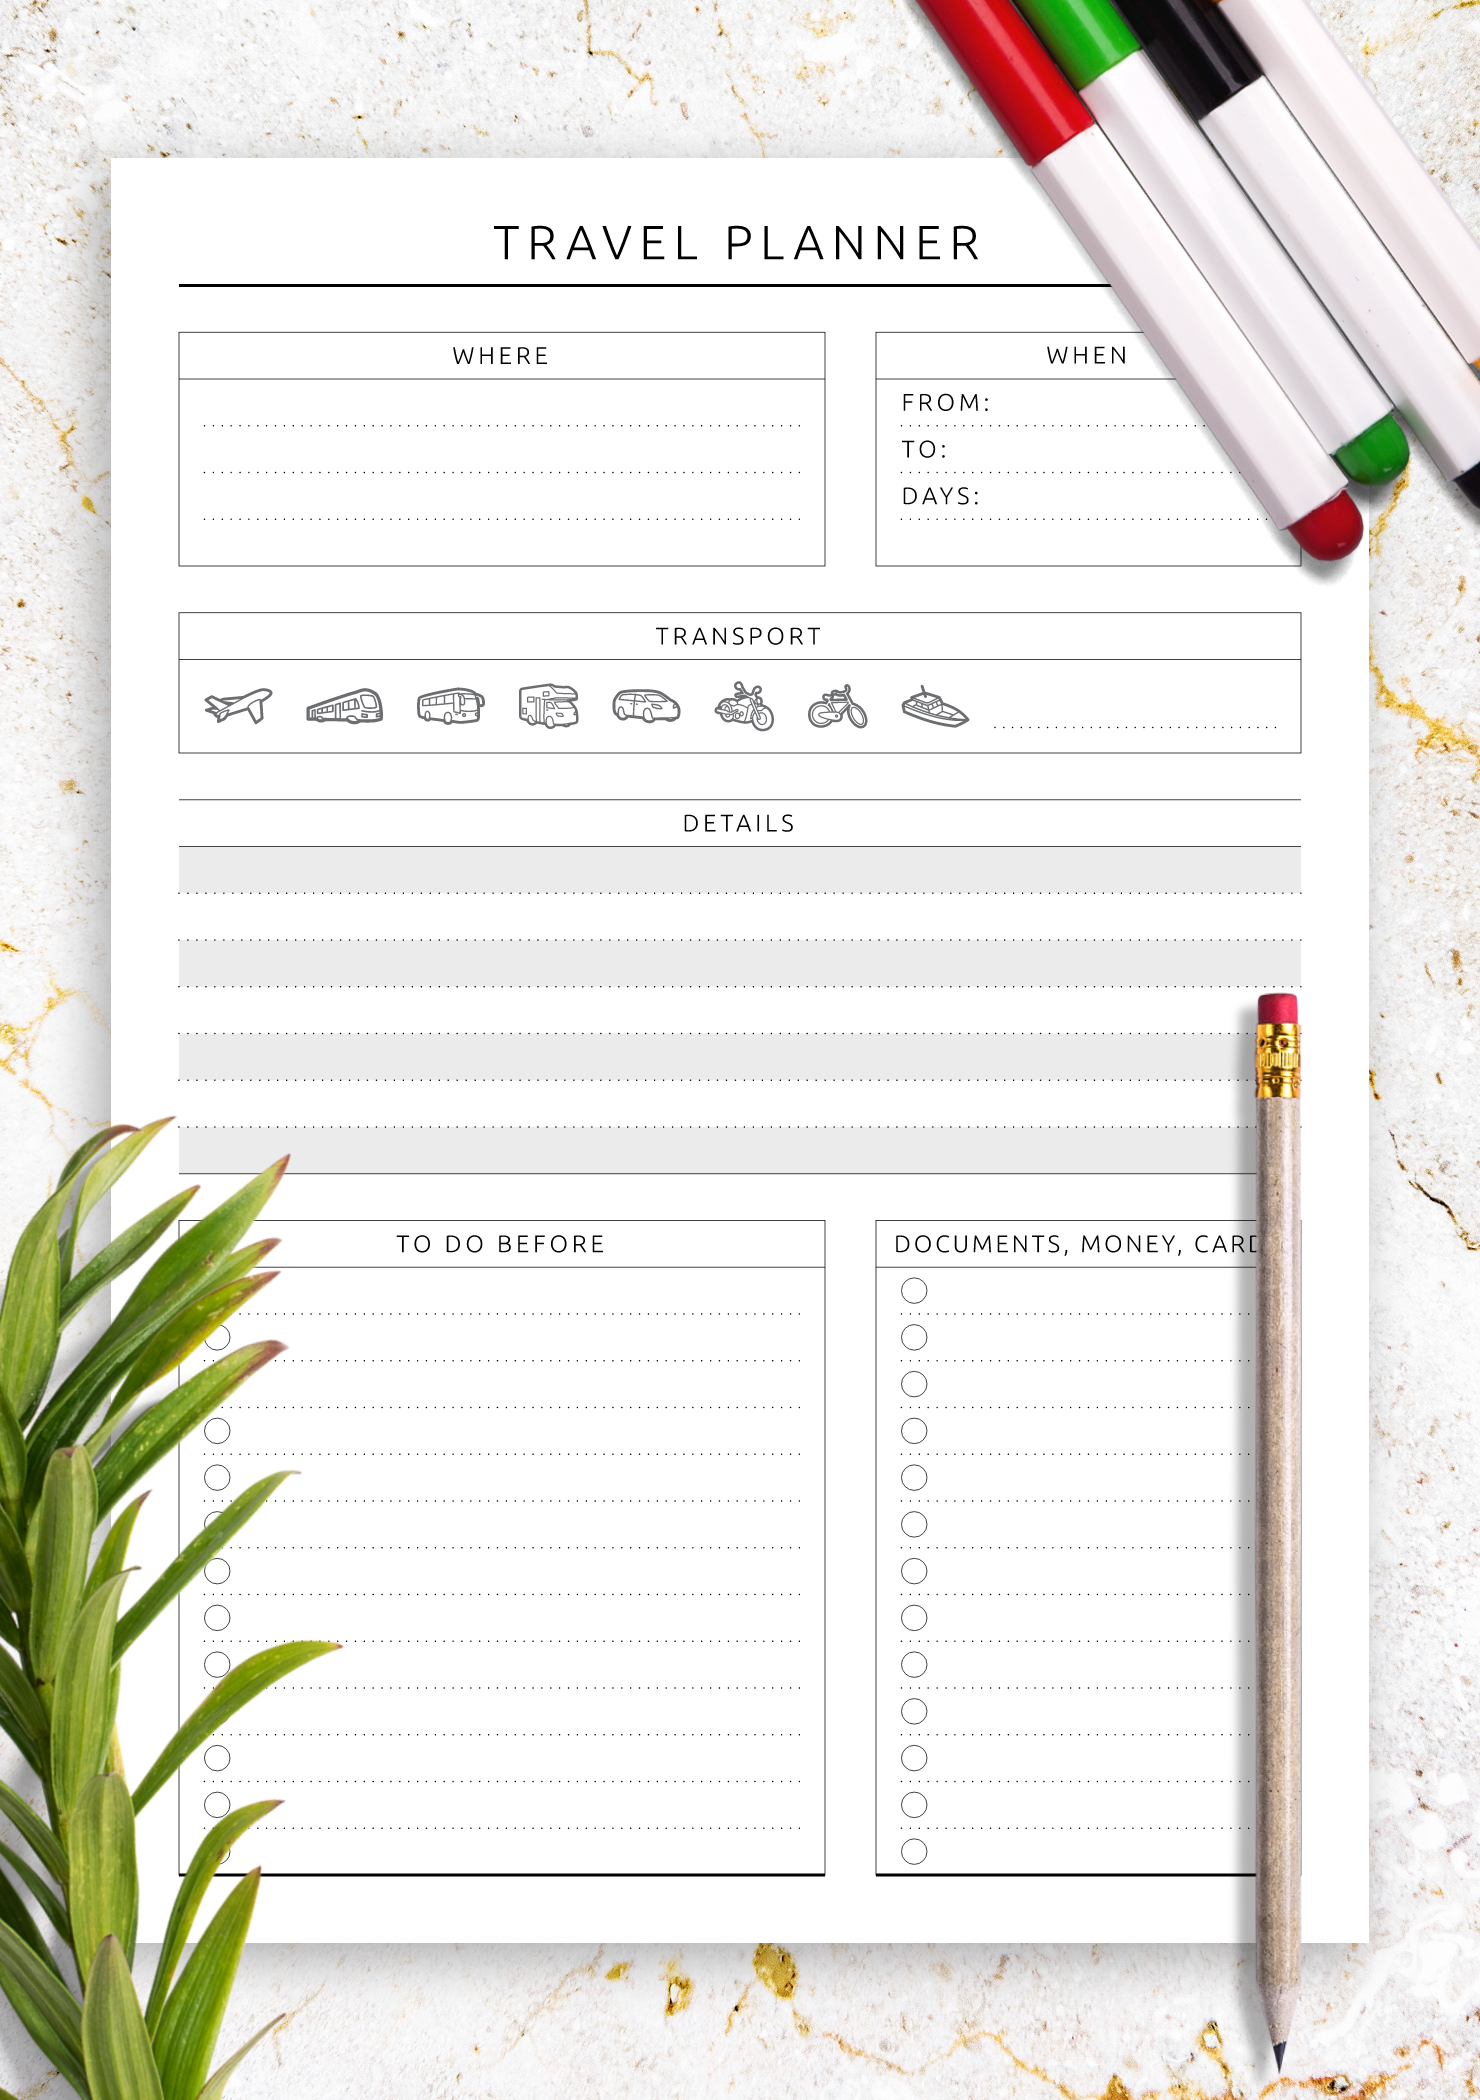 One page Daily Plan including places to see and eat Instant Digital Download Travel Planner Printable